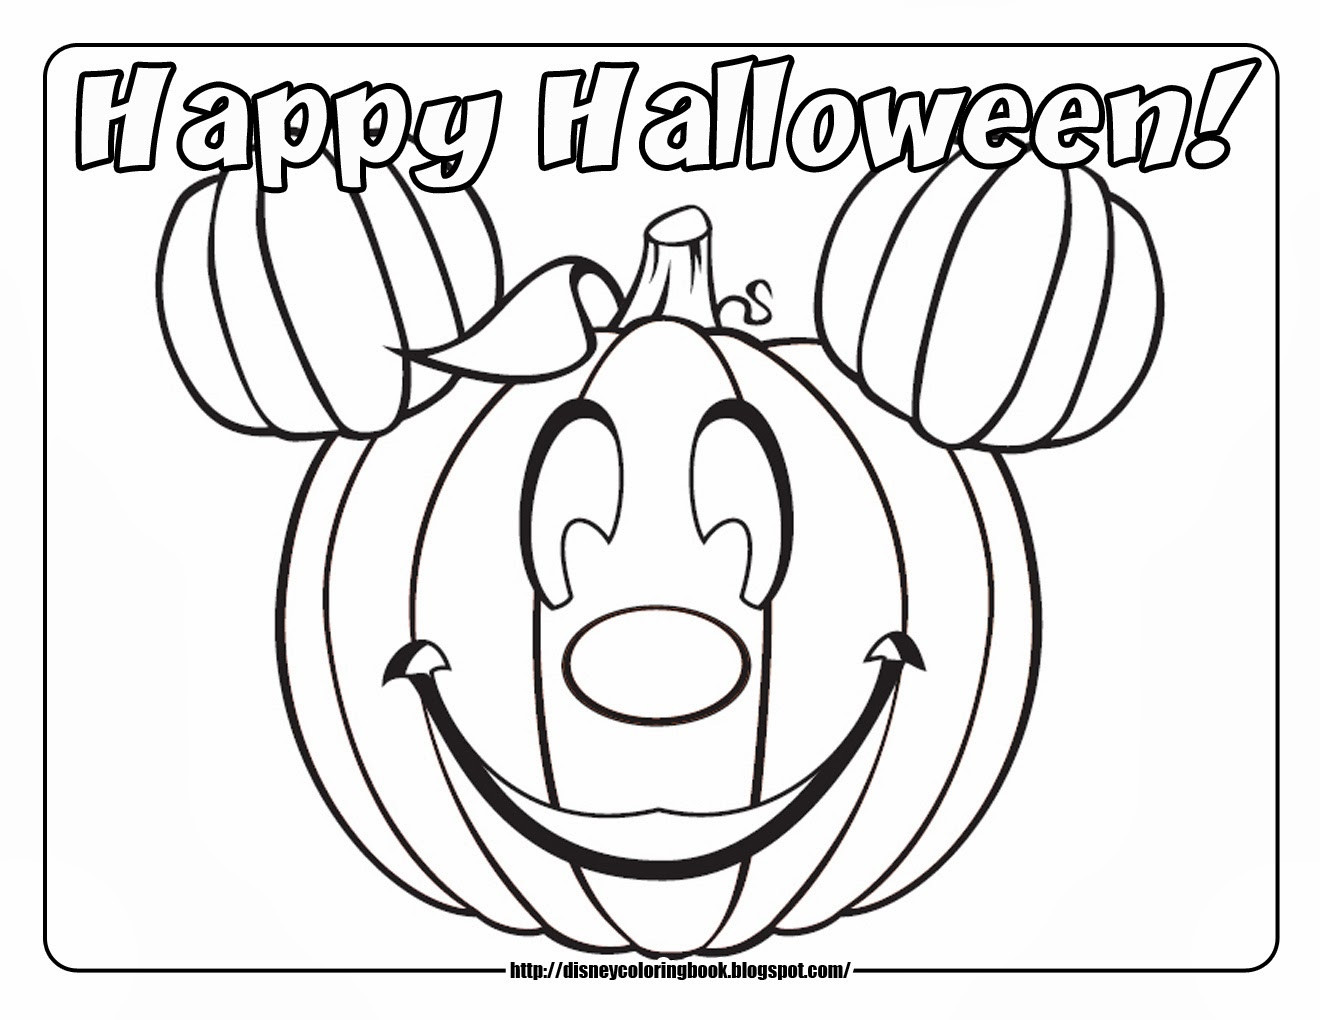 Printable Halloween Coloring Pages
 Halloween Coloring Pages – Free Printable Minnesota Miranda